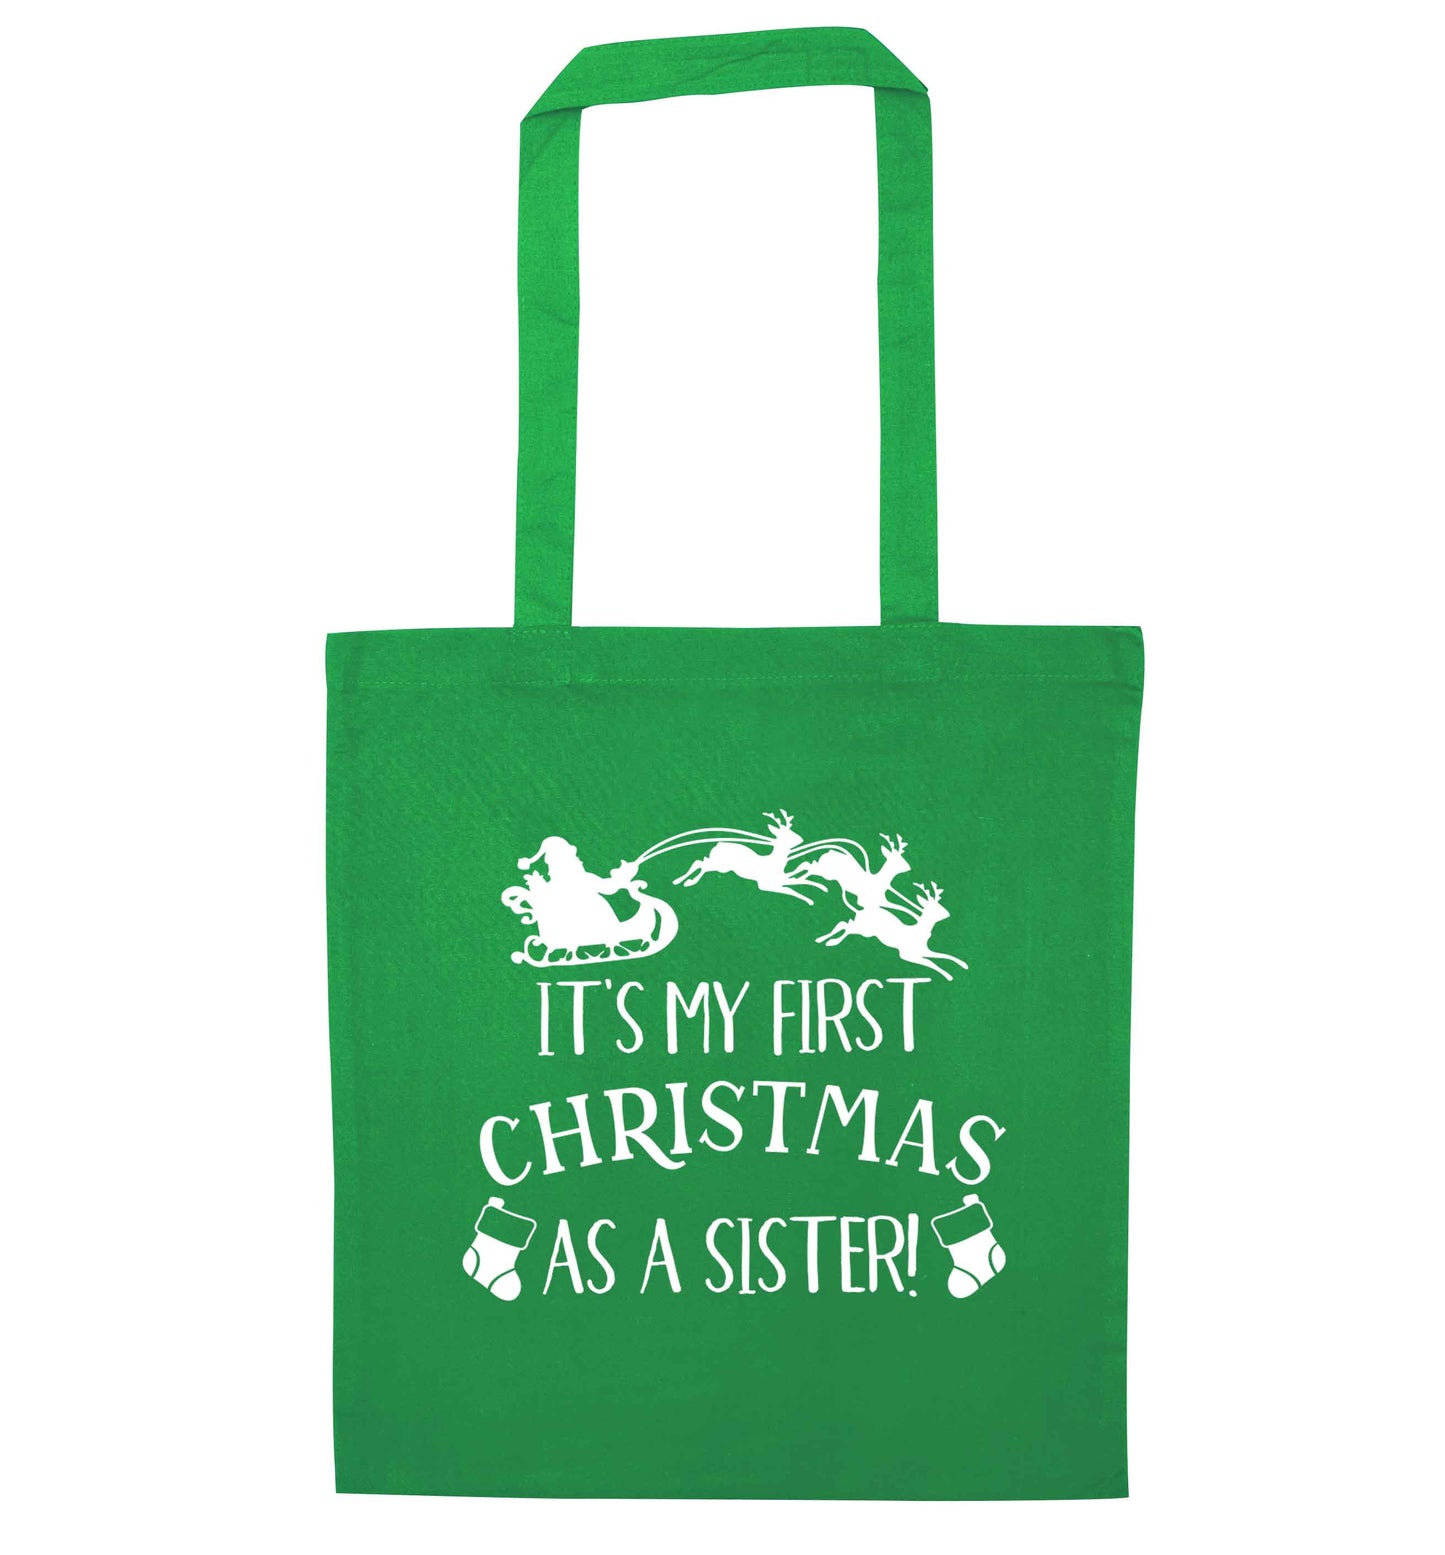 It's my first Christmas as a sister! green tote bag